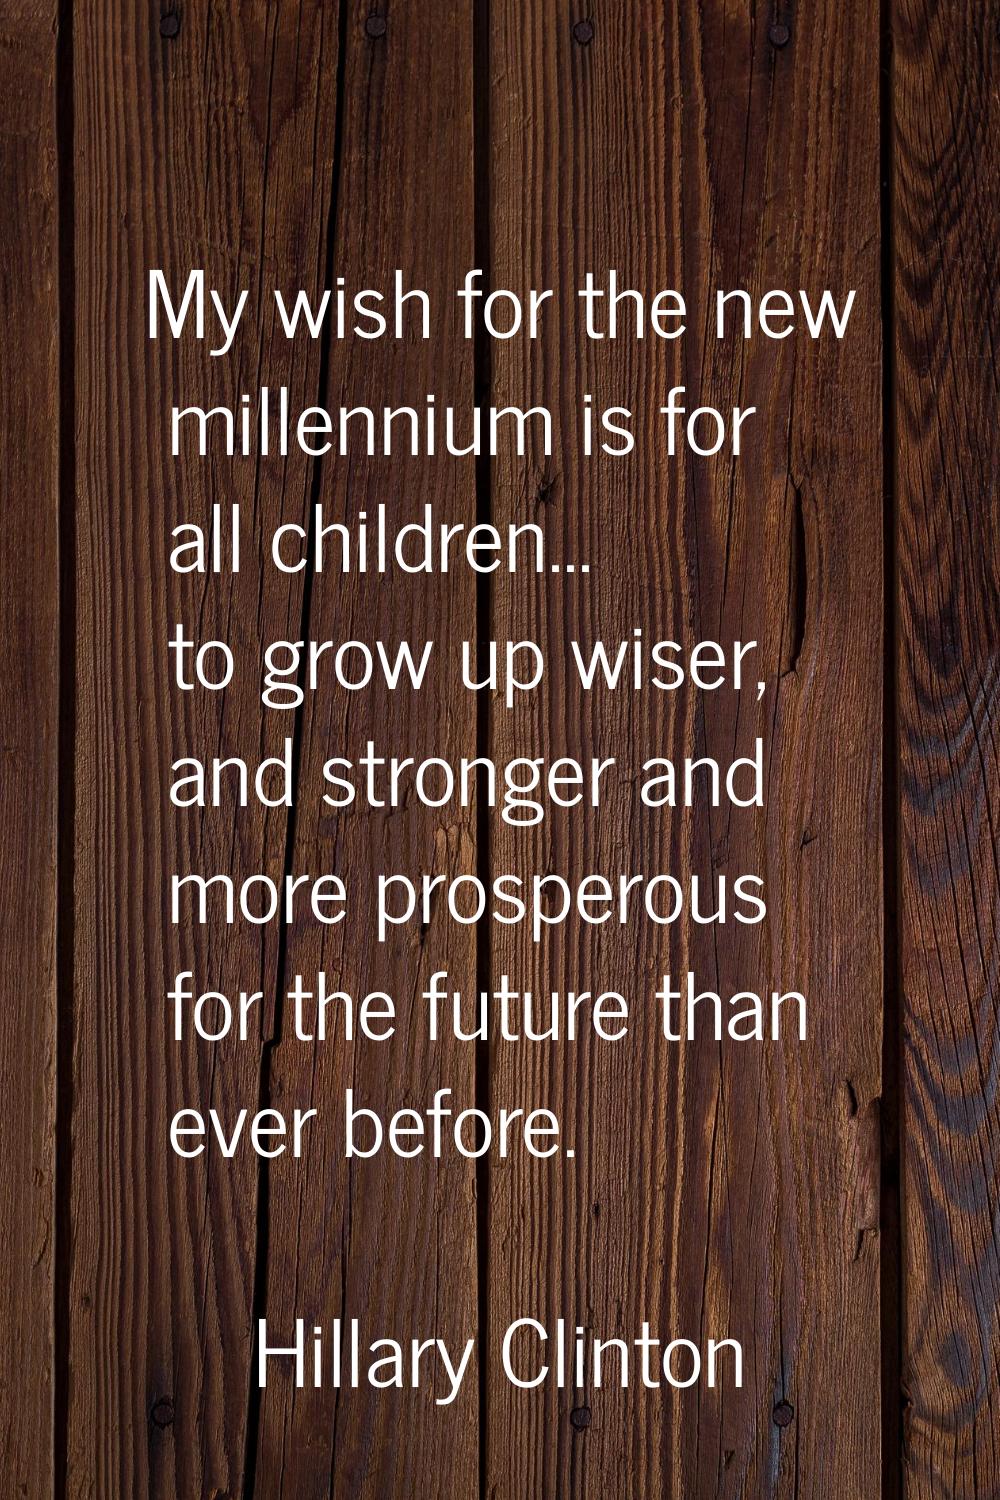 My wish for the new millennium is for all children... to grow up wiser, and stronger and more prosp